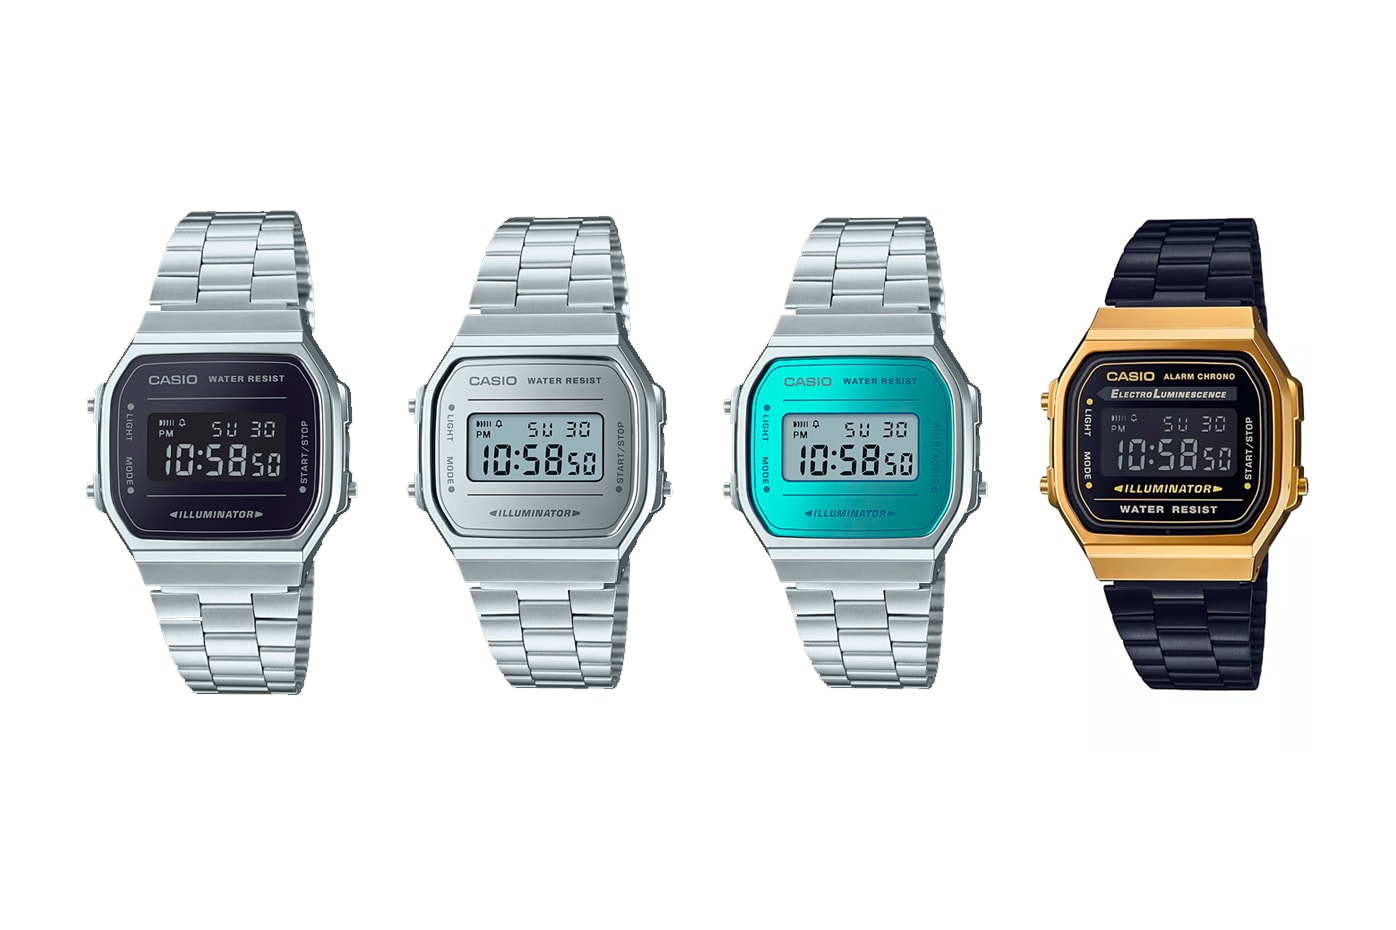 Casio Vintage Collection 2018 New Watches metallic gold silver teal price purchase digital retro accessories